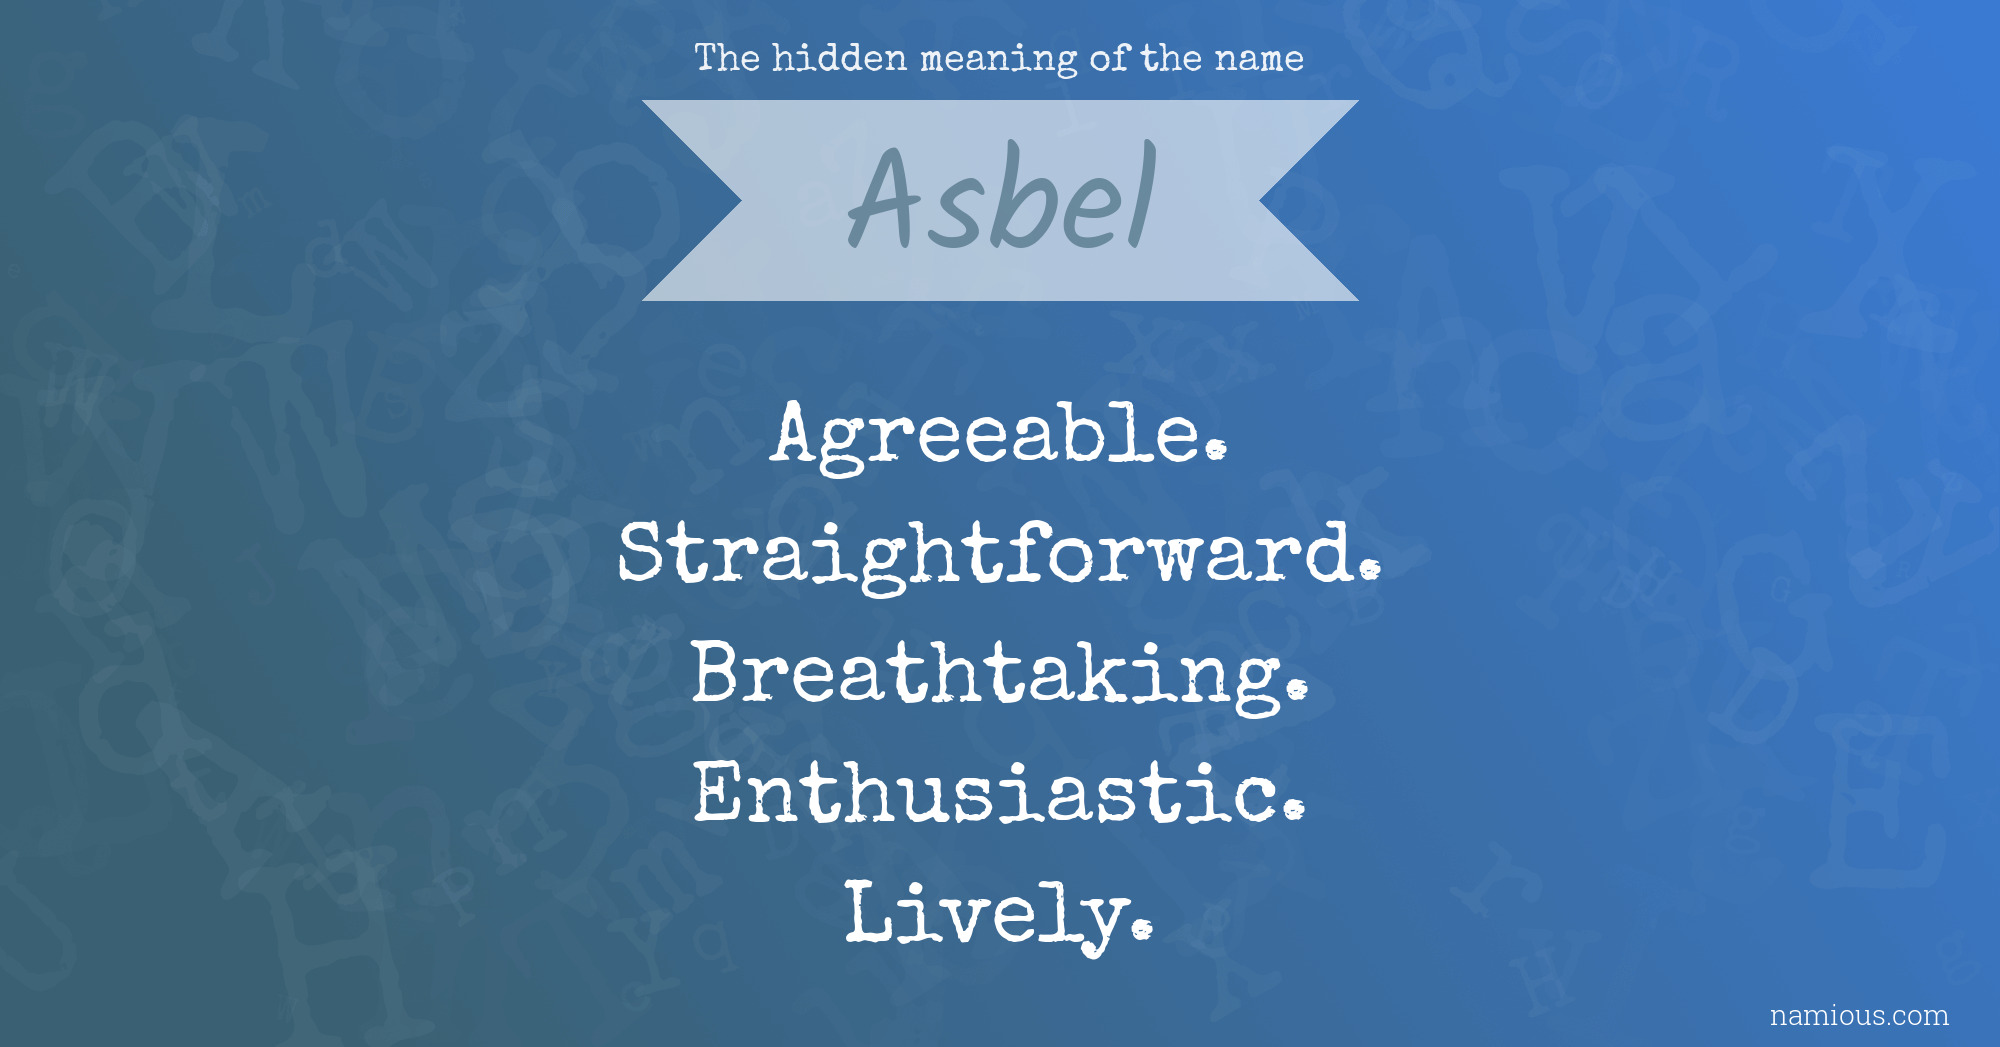 The hidden meaning of the name Asbel